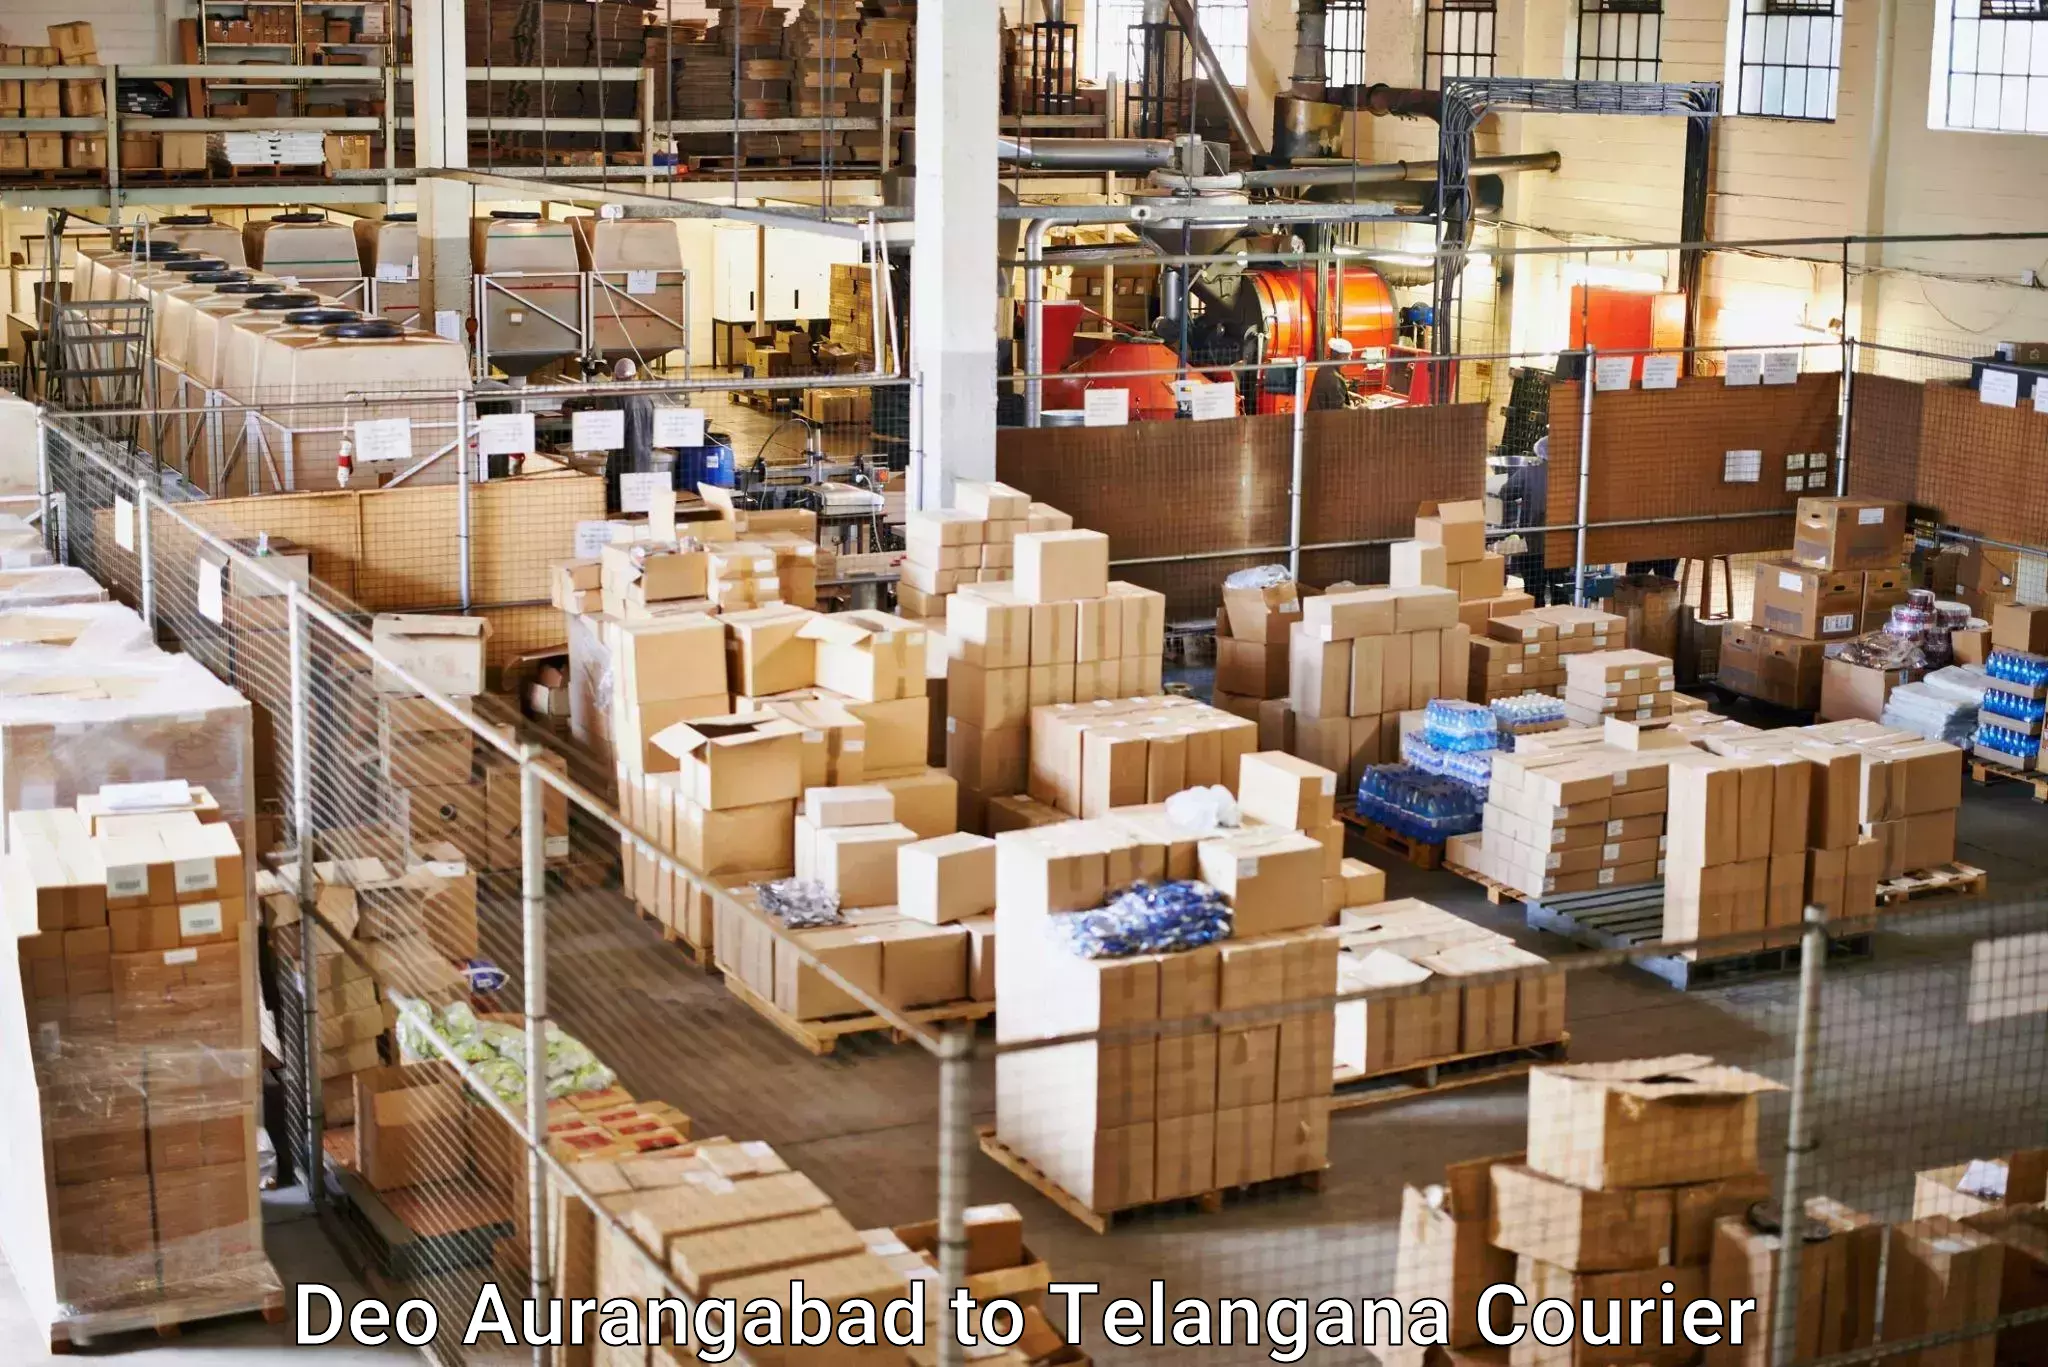 Secure freight services Deo Aurangabad to Telangana